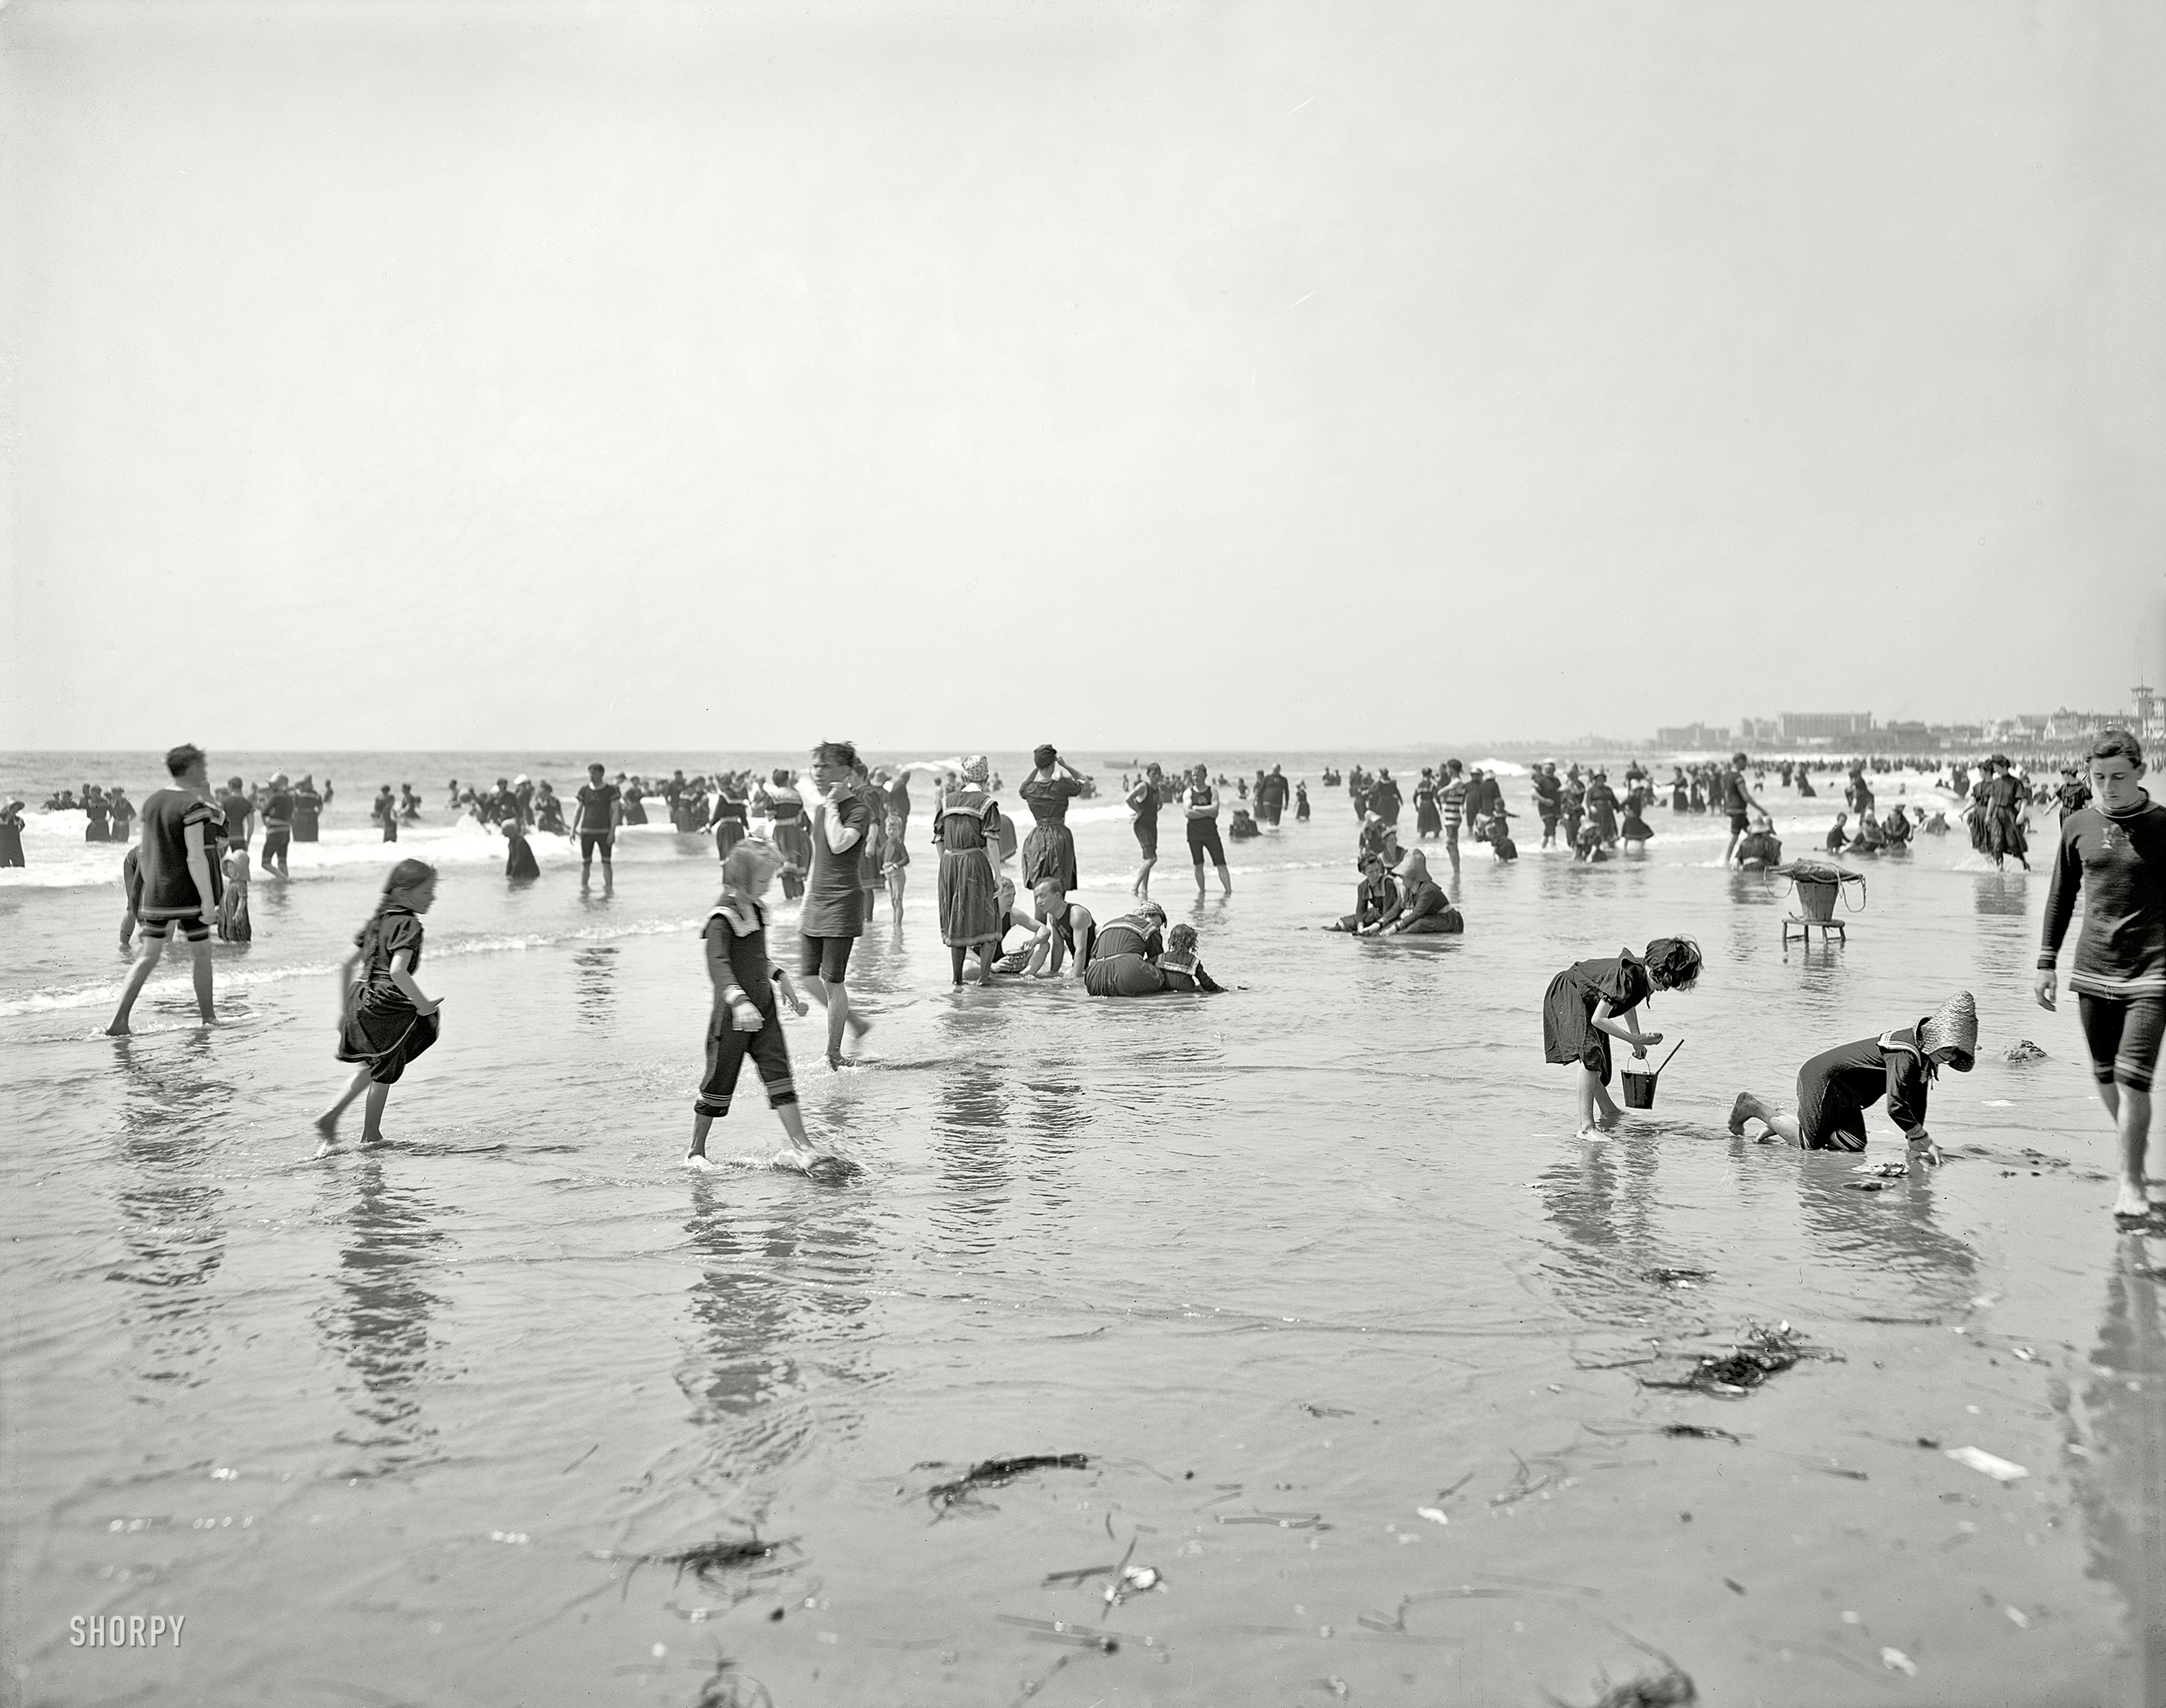 The Jersey Shore circa 1905. "On the beach at Atlantic City." Where's my pail? 8x10 inch dry plate glass negative, Detroit Publishing Company. View full size.